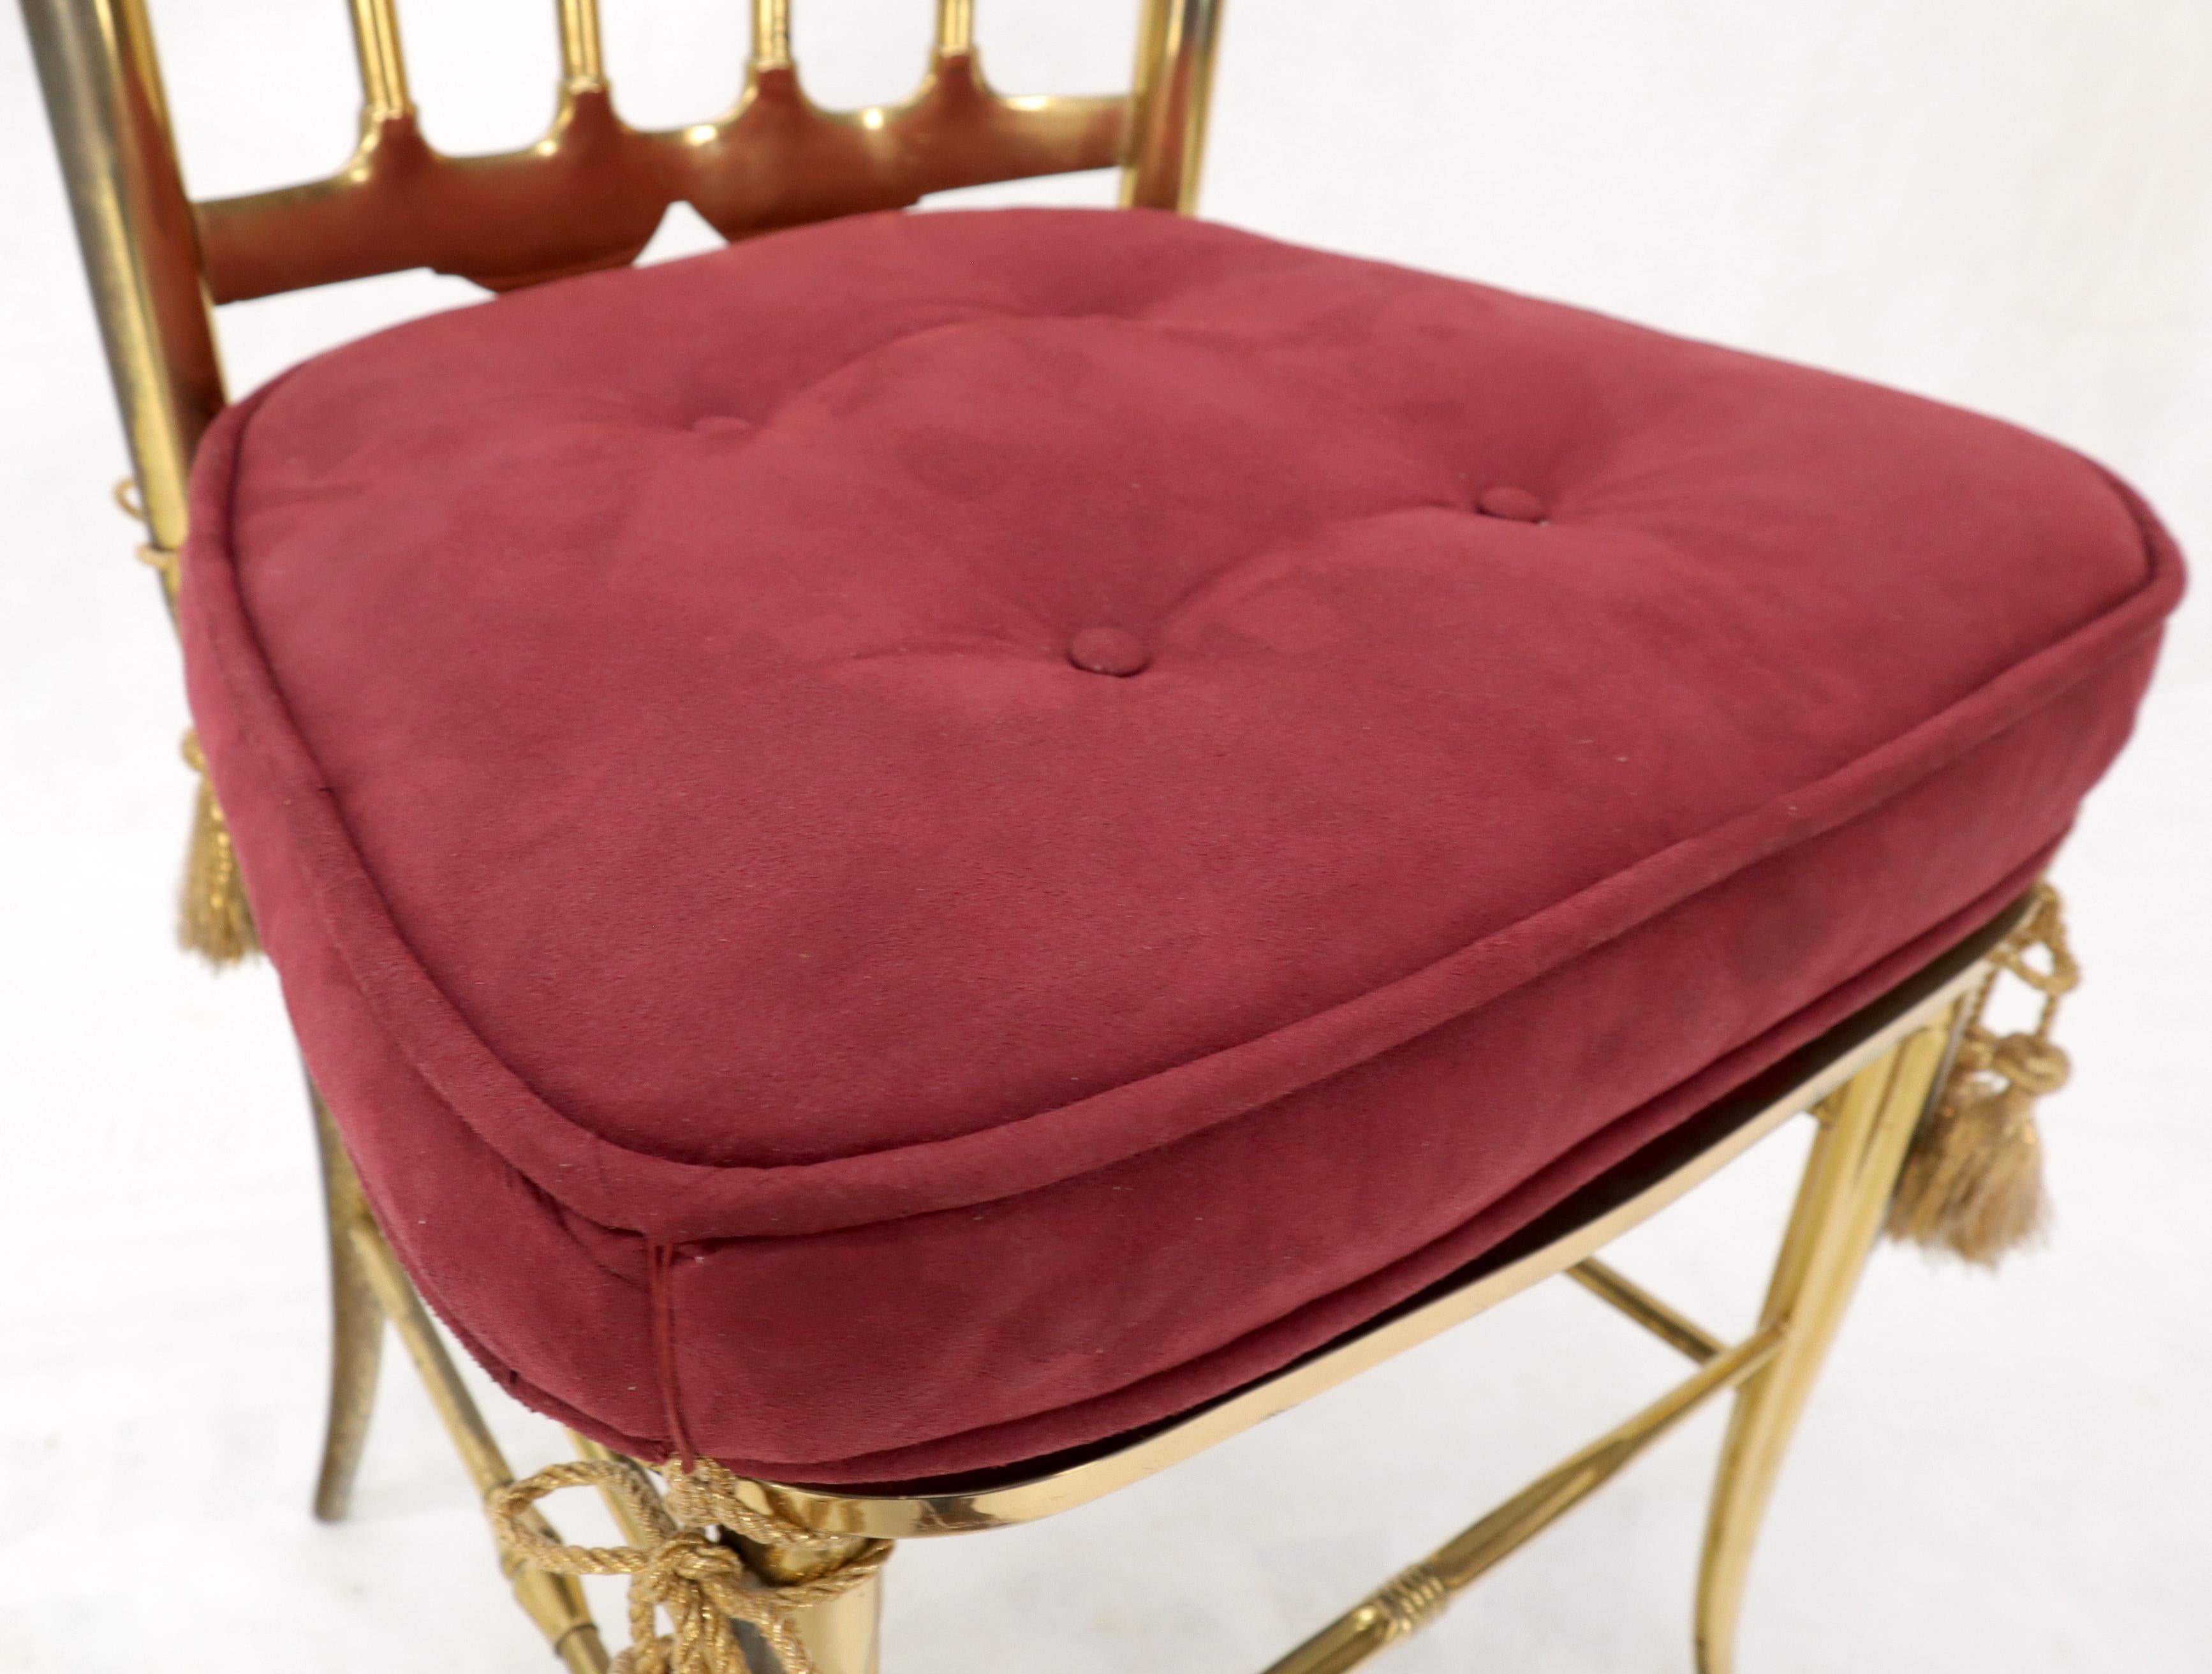 Set of 2 Italian Solid Brass Chiavari Chairs from 1950s Salmon Red Upholstery For Sale 2